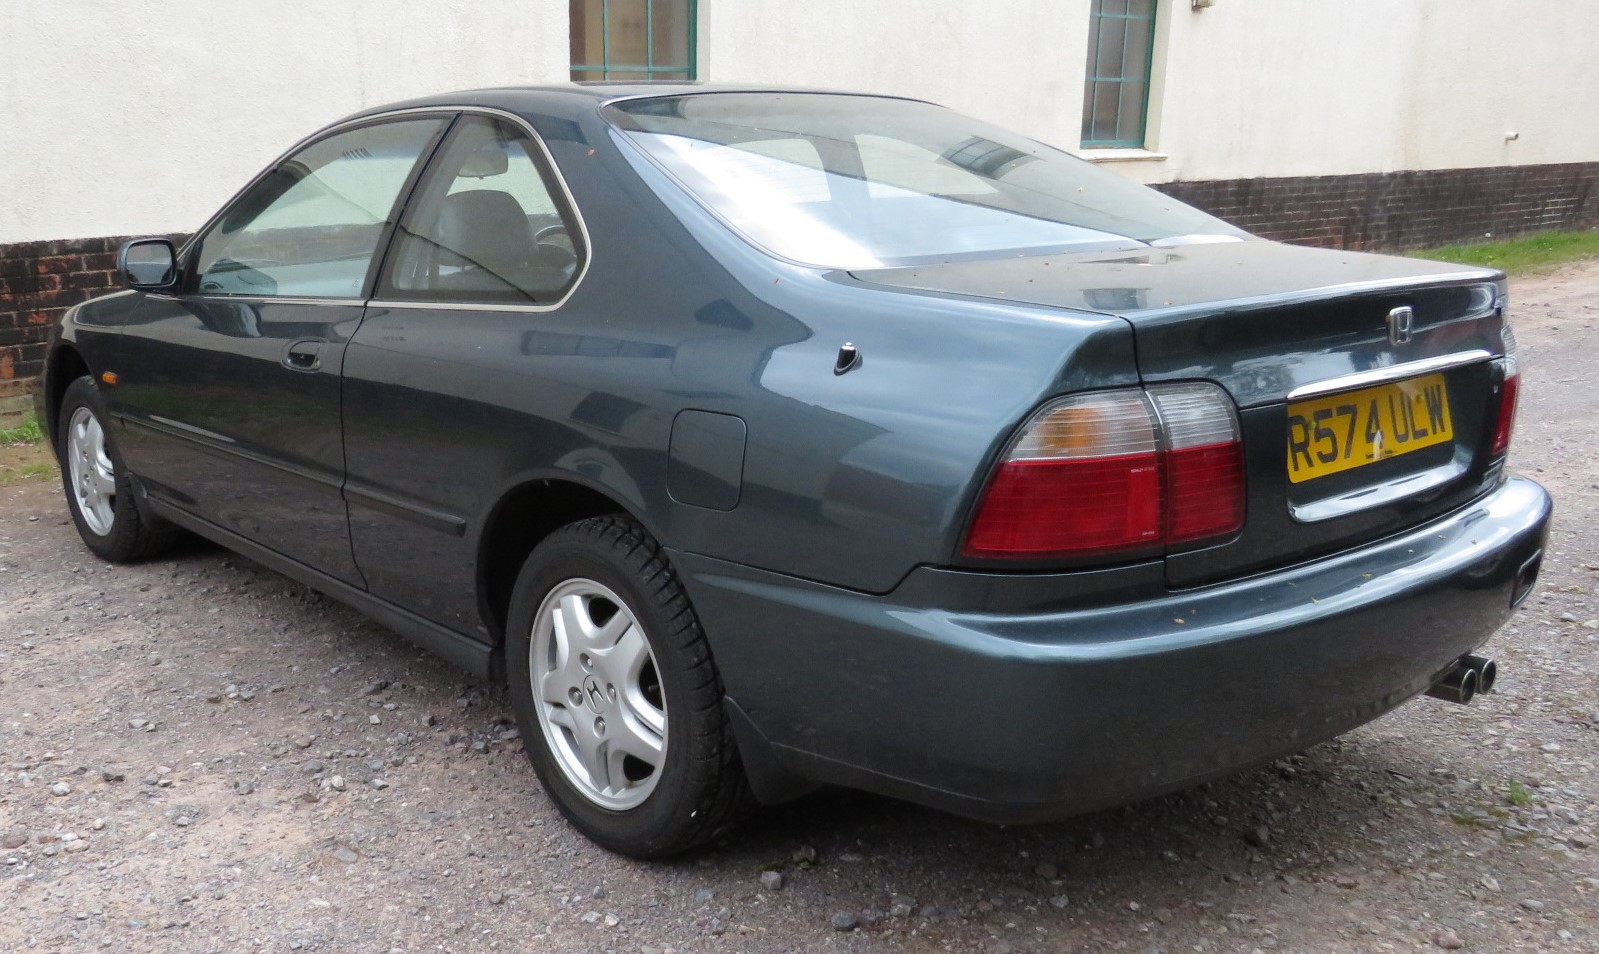 HONDA ACCORD ES COUPE AUTO, R574 ULW, 35,942 MILES, DATE OF FIRST REGISTRATION 19 08 1997, 2156CC, - Image 4 of 20